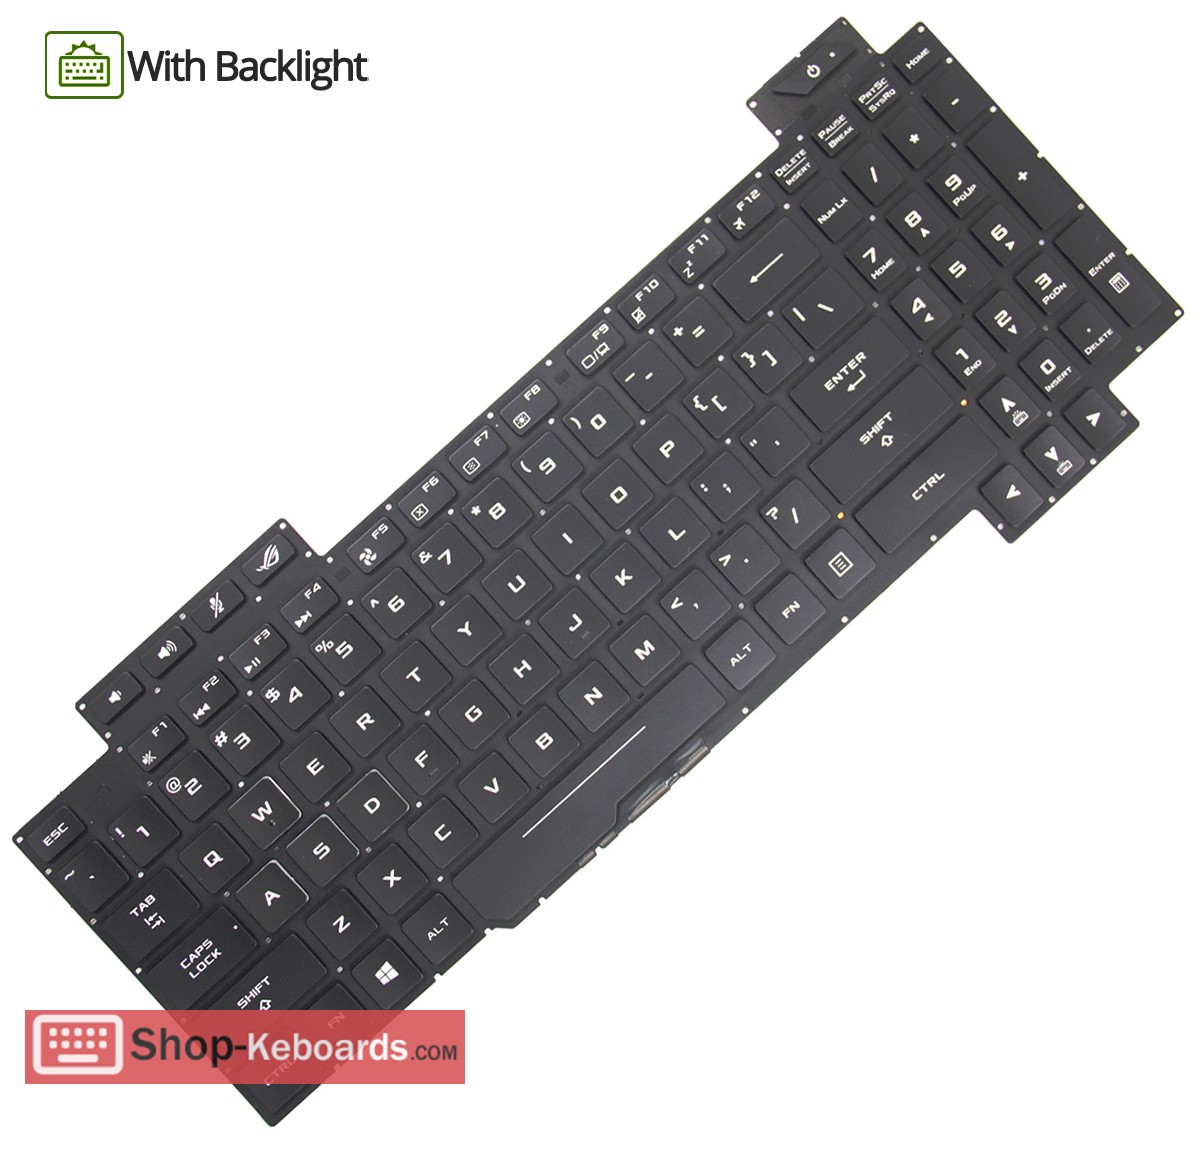 Asus 0KNB0-661AFR00 Keyboard replacement